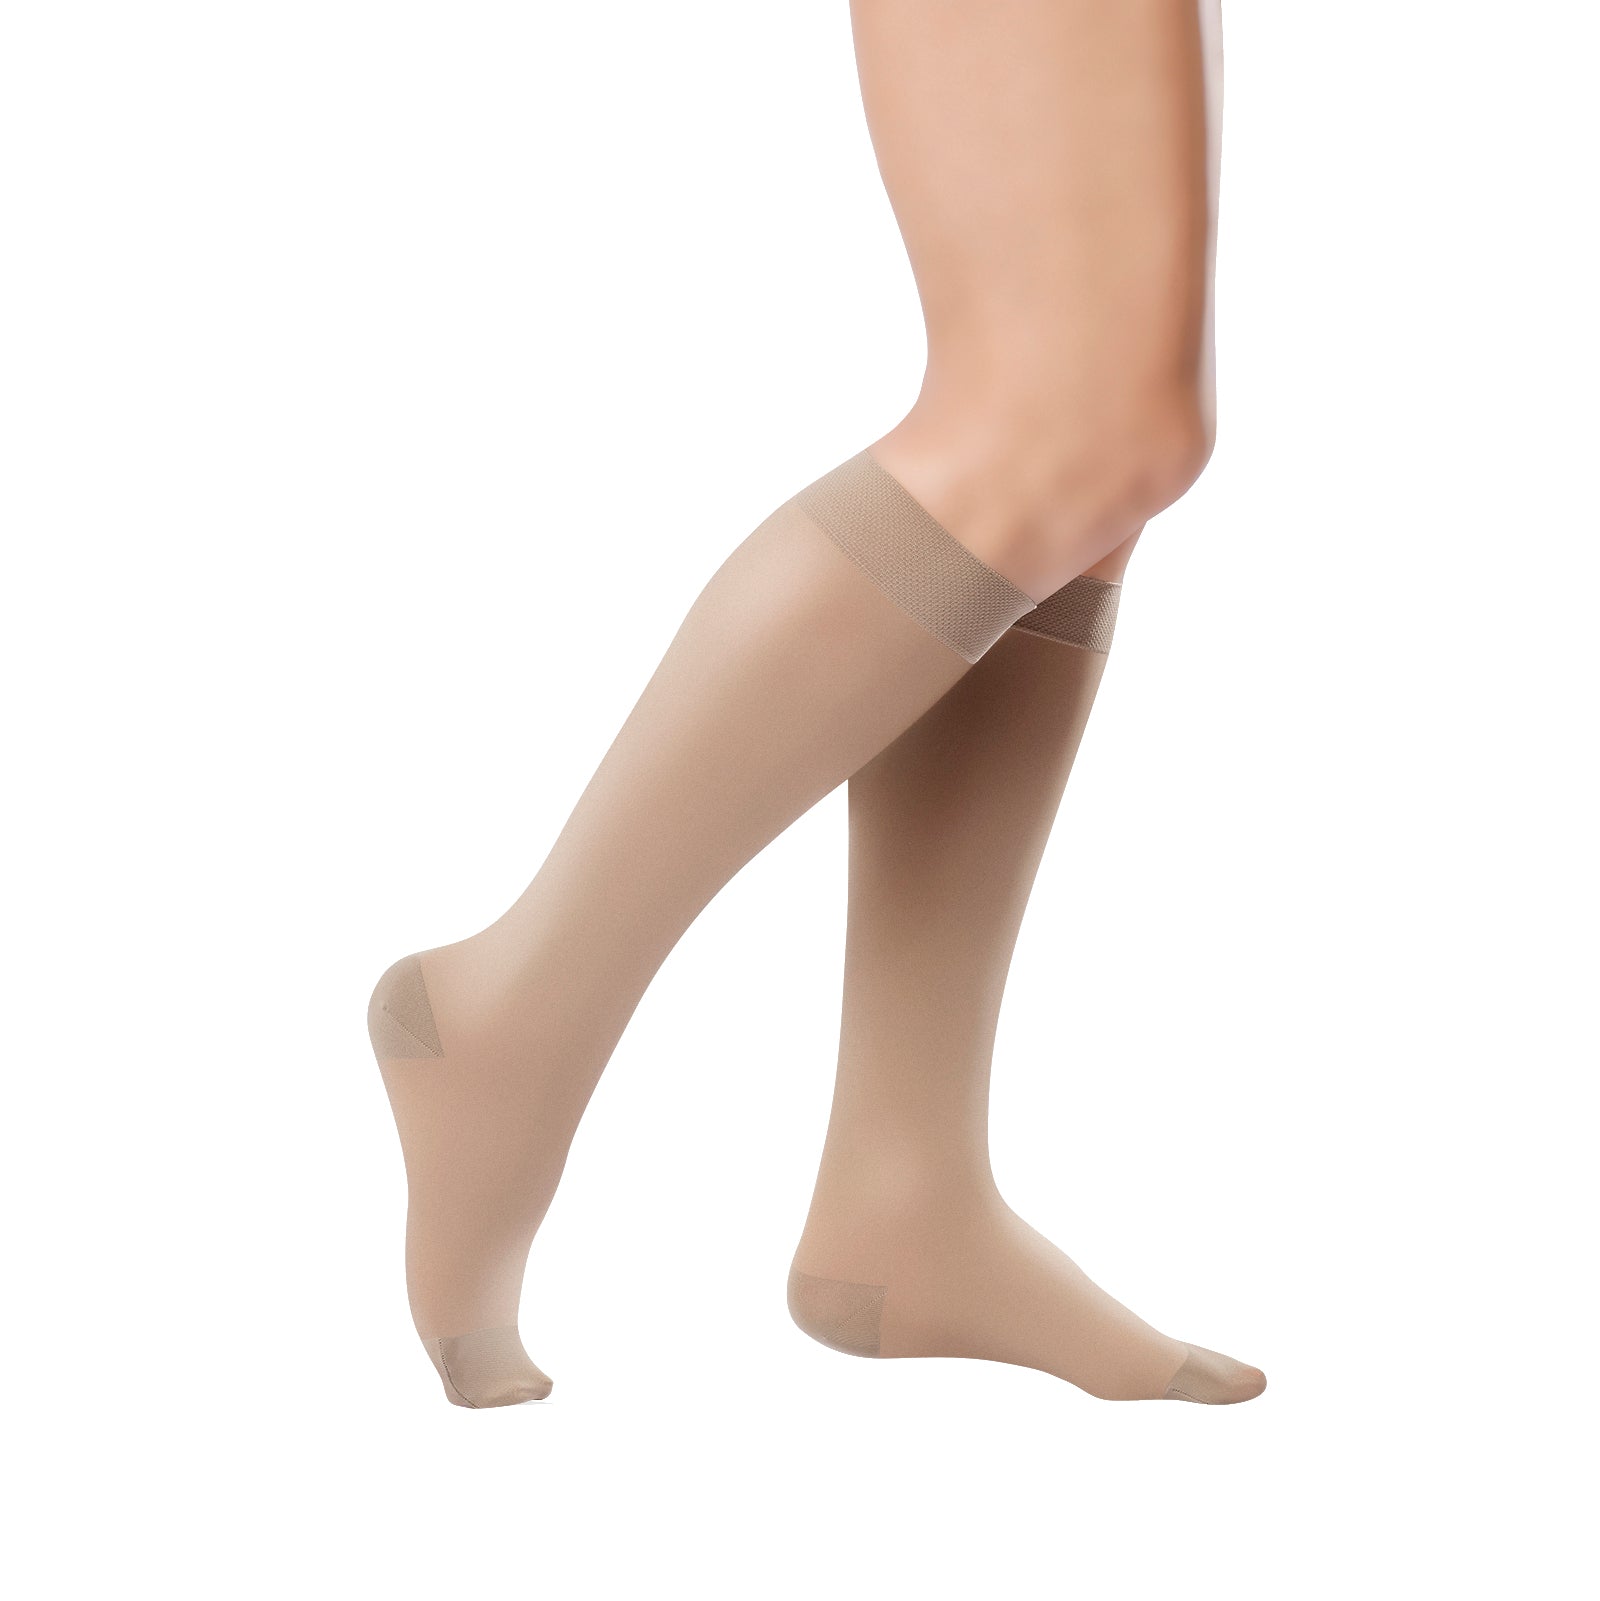 FITLEGS®2 Class II compression stockings - beige knee length | Circulation  Clinic